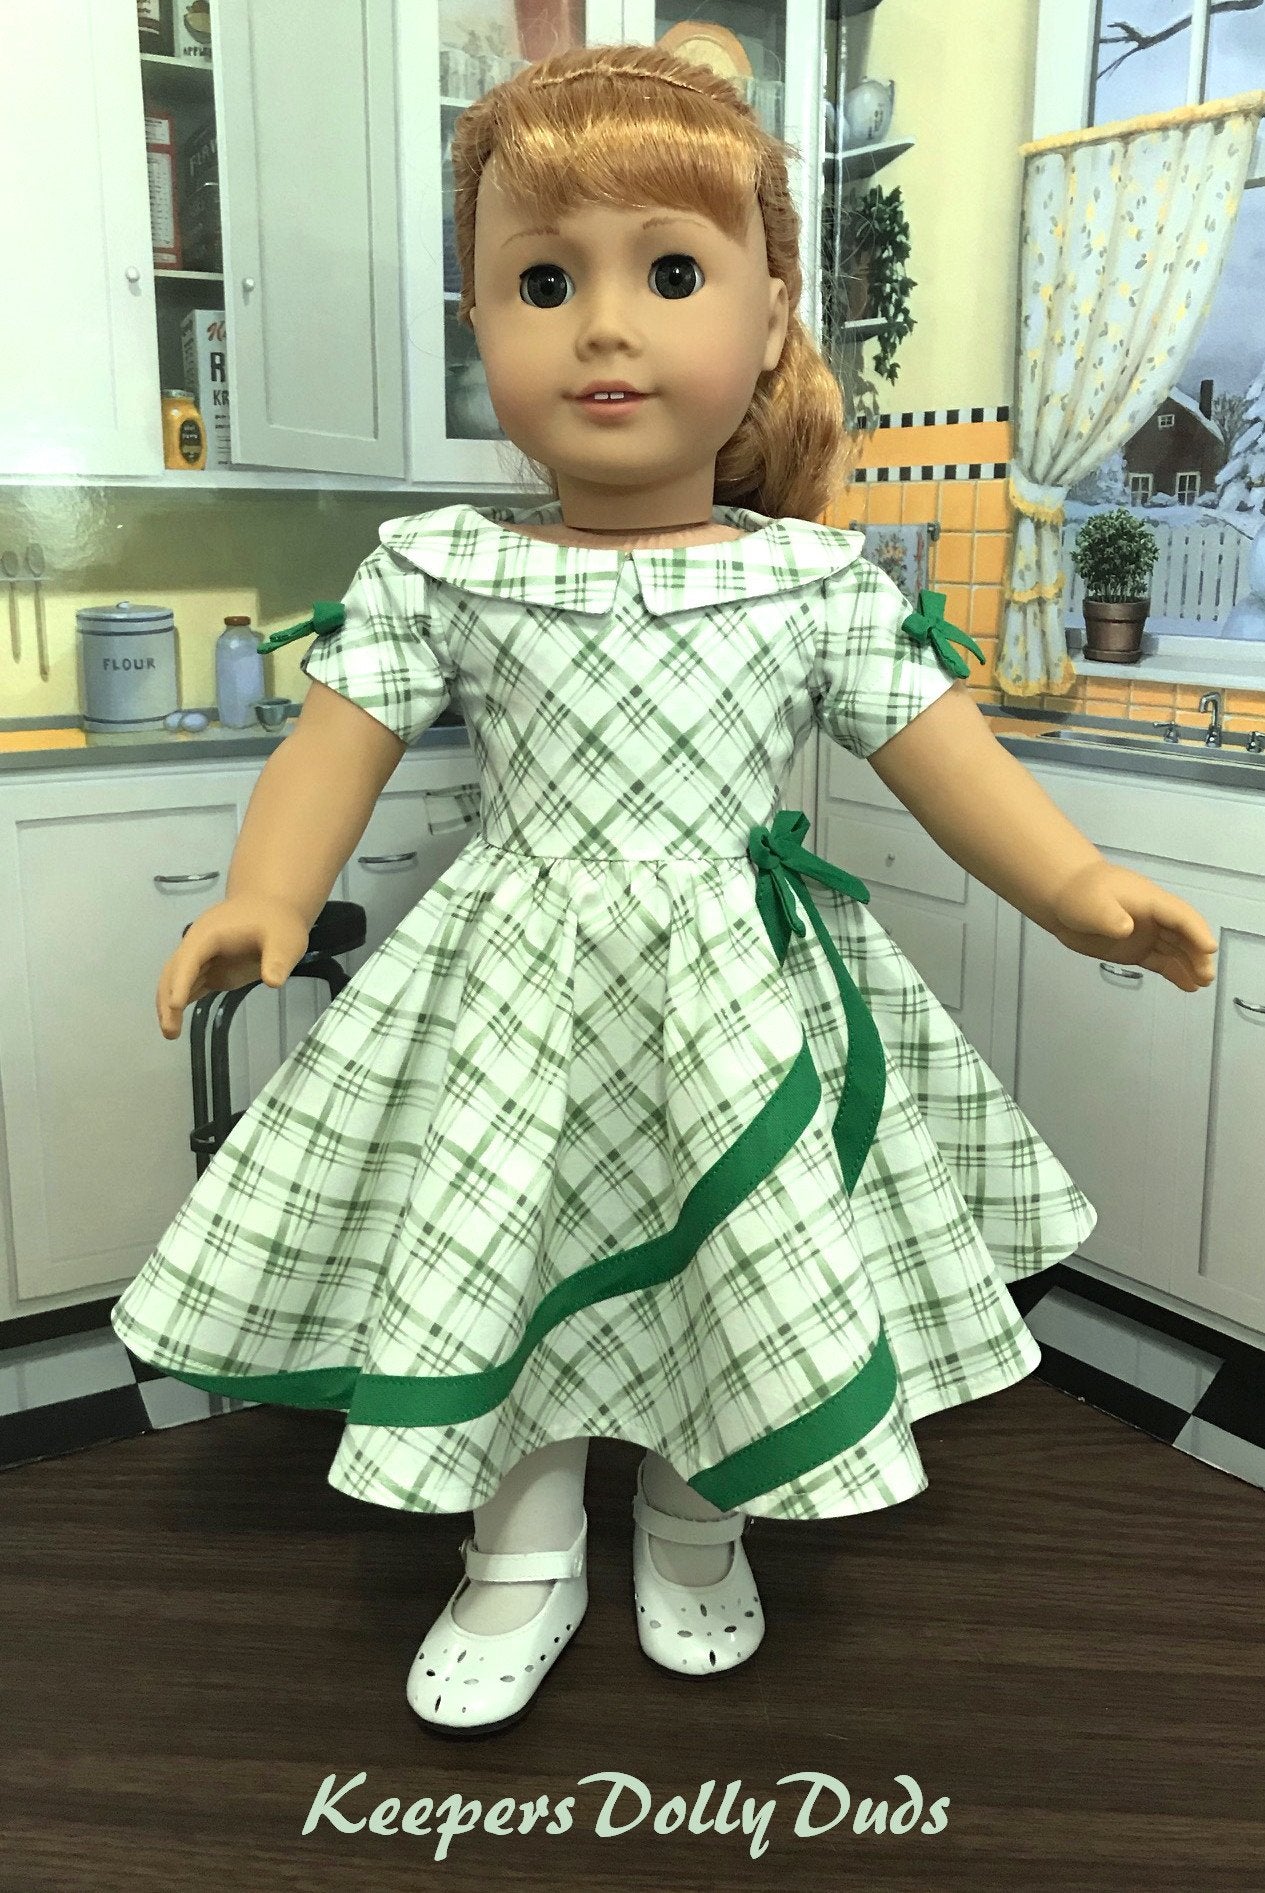 Keepers Dolly Duds 1950s Circle Swirl Dress 18 Doll Clothes PDF